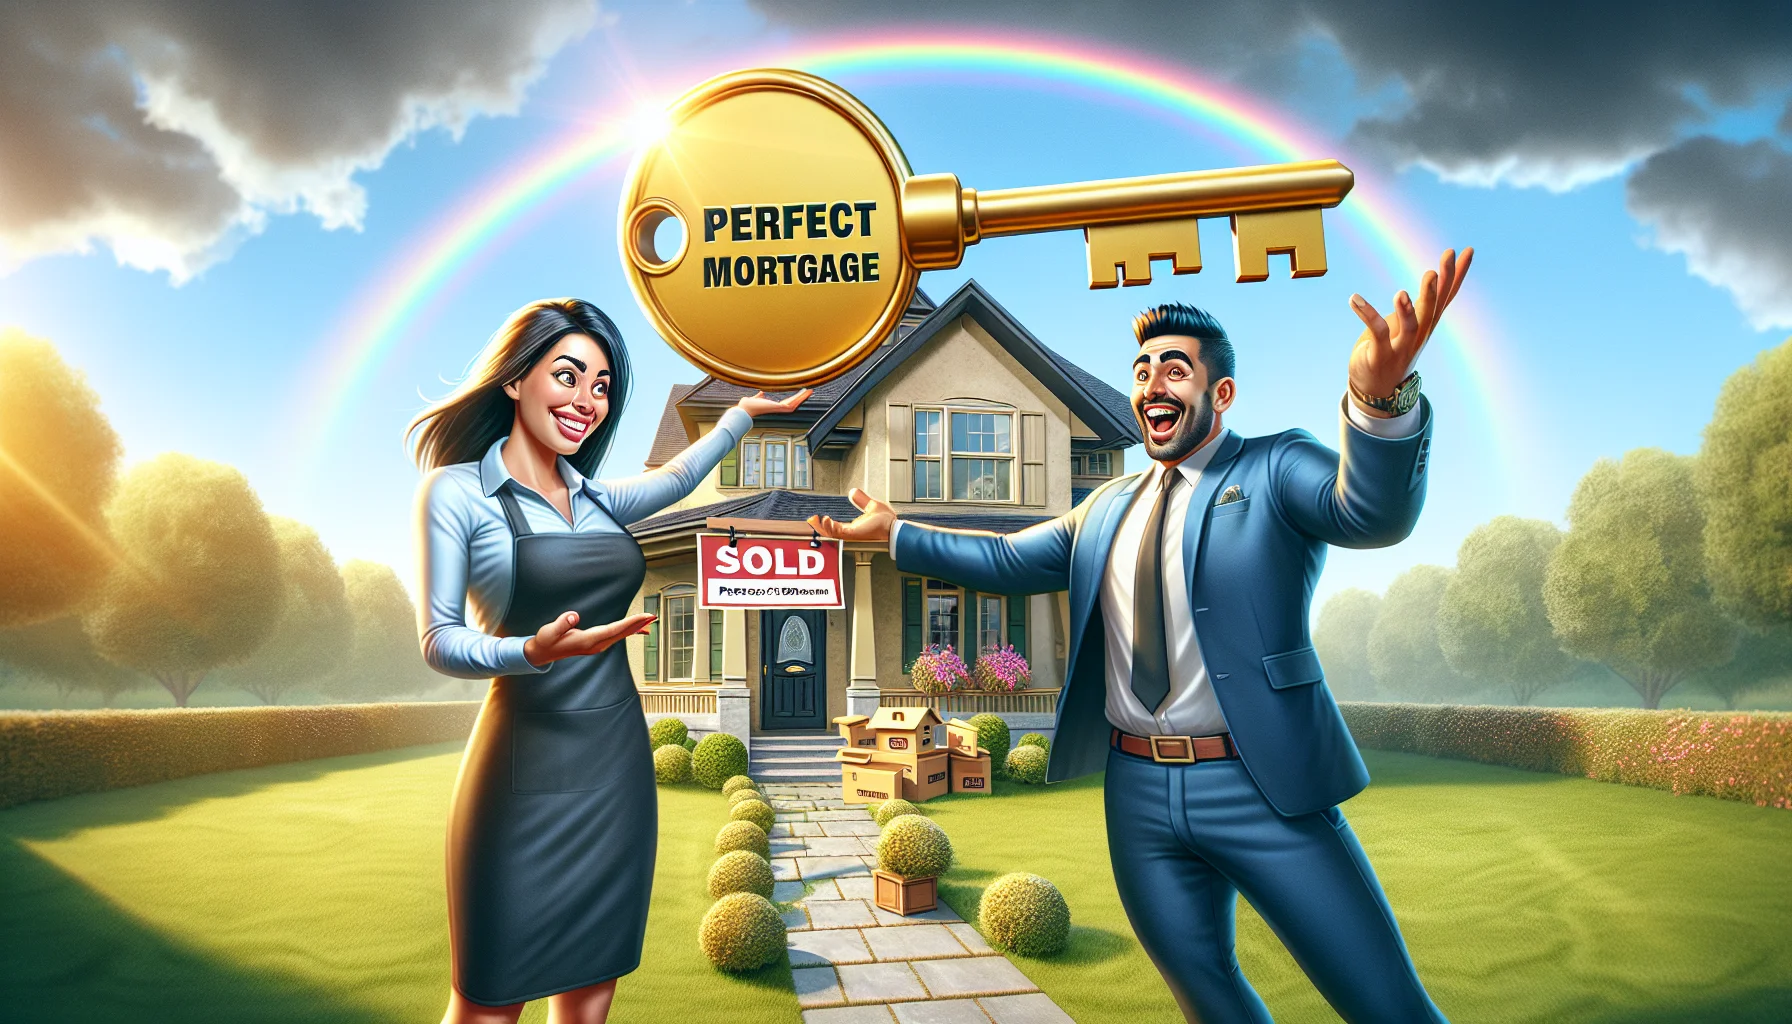 Imagine an artful and humorous scenario dedicated to showcasing a mortgage product. In this scene, a happy South Asian female realtor hands a giant golden key labeled 'Perfect Mortgage' to a proud Middle-Eastern male homeowner. His arms are wide open with a huge smile on his face, reflecting relief and joy. In the background is a beautiful, idyllic house with a 'Sold' sign on the manicured lawn, under a clear, sunny sky. A rainbow pops out from behind the house, symbolizing the homebuyer's optimism and successful transition into homeownership.